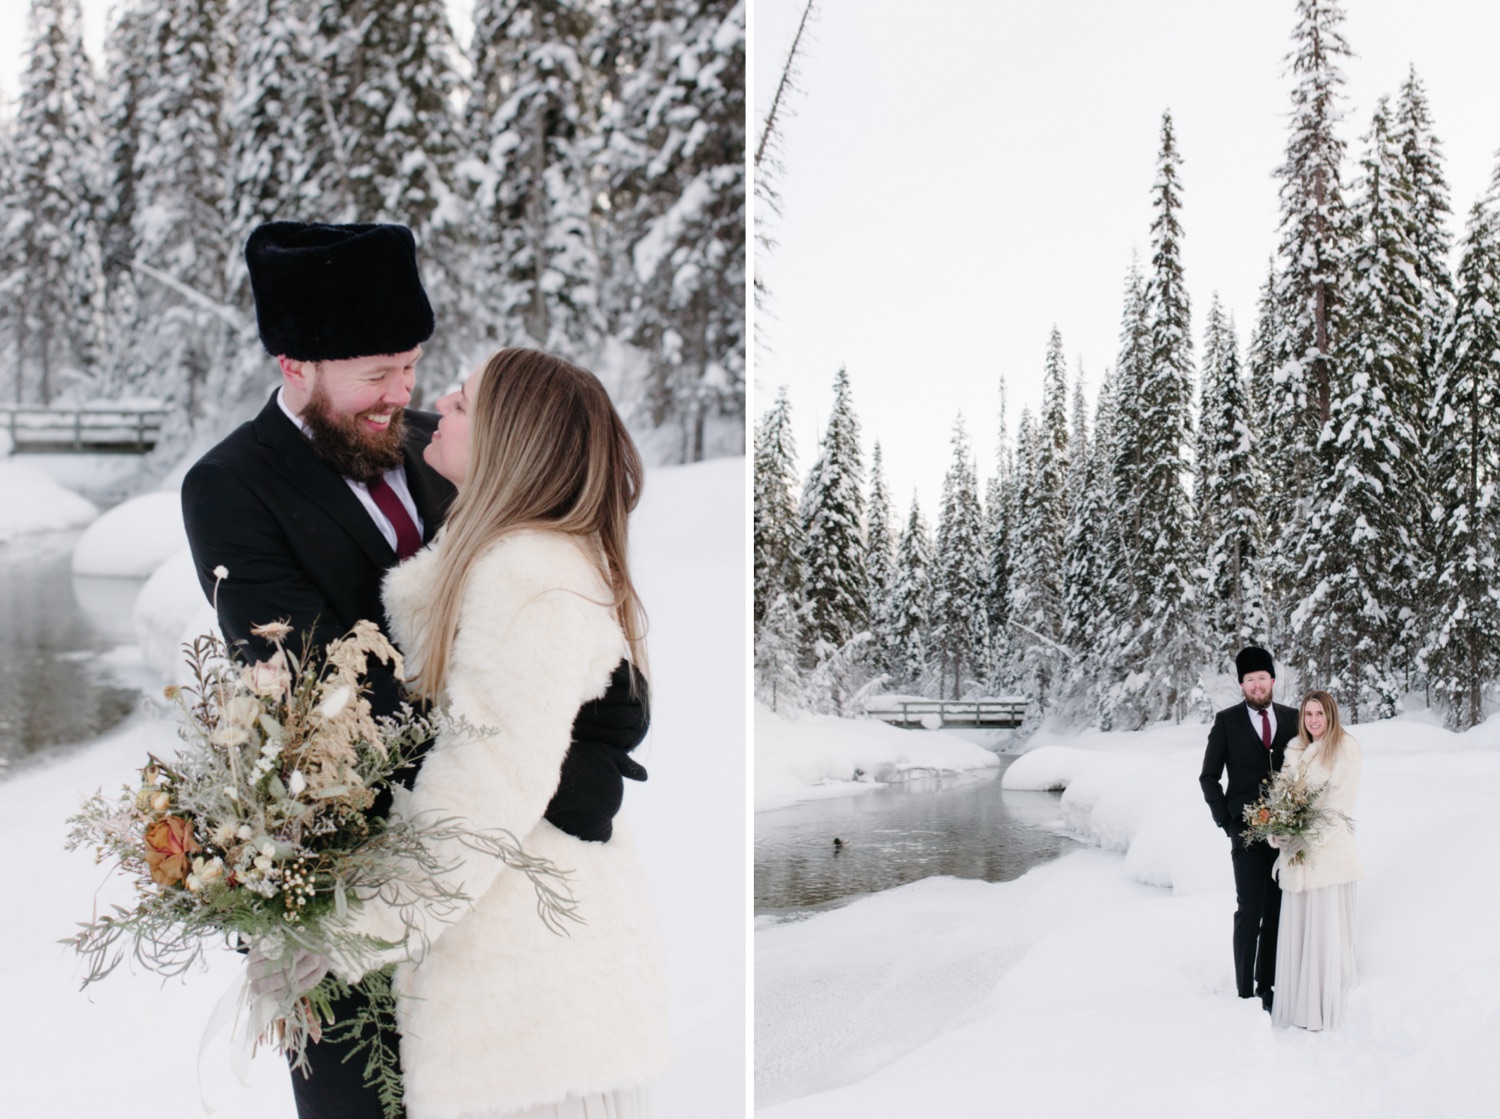 Timeless wedding portraits near frozen lake in Canadian Mountains